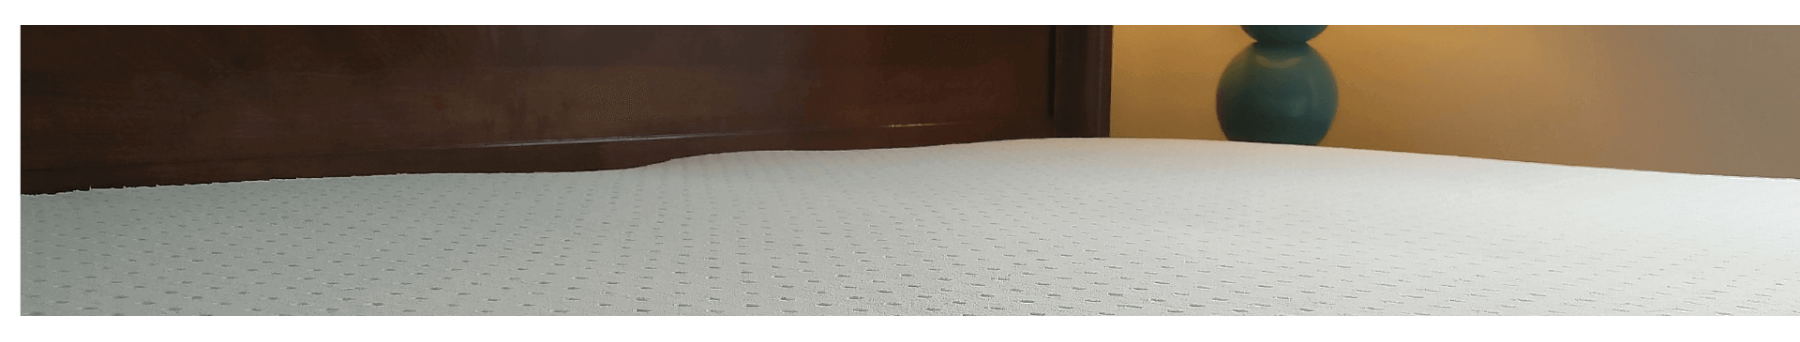 Latex mattress- 100% rubber foam in firm or organic bed sizes